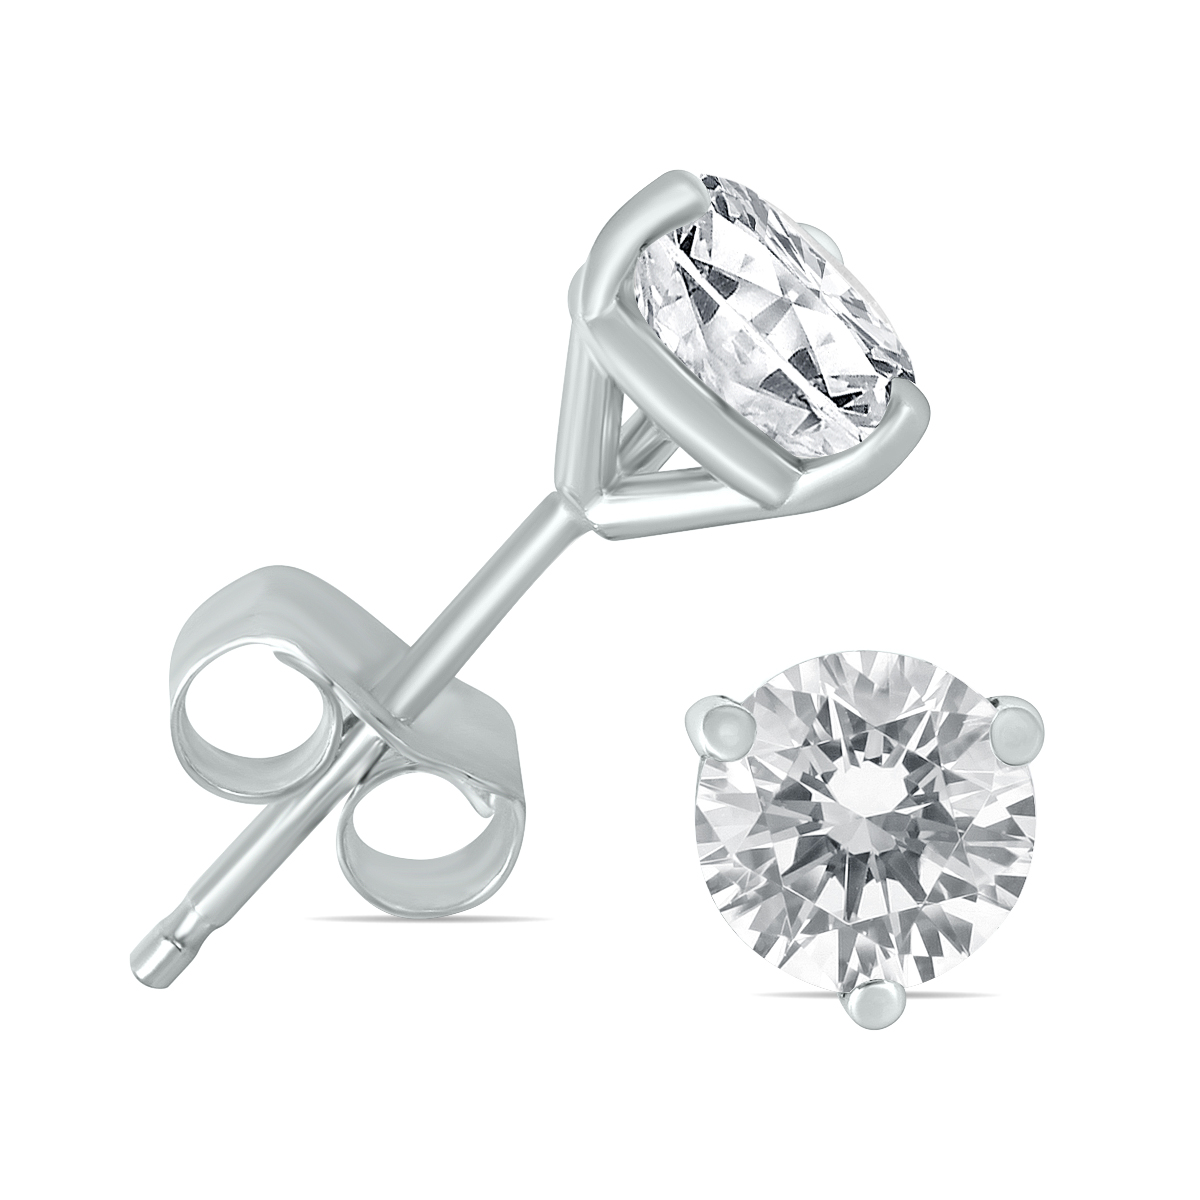 1/2 Carat TW AGS Certified Martini Set Round Diamond Solitaire Earrings in 14K White Gold